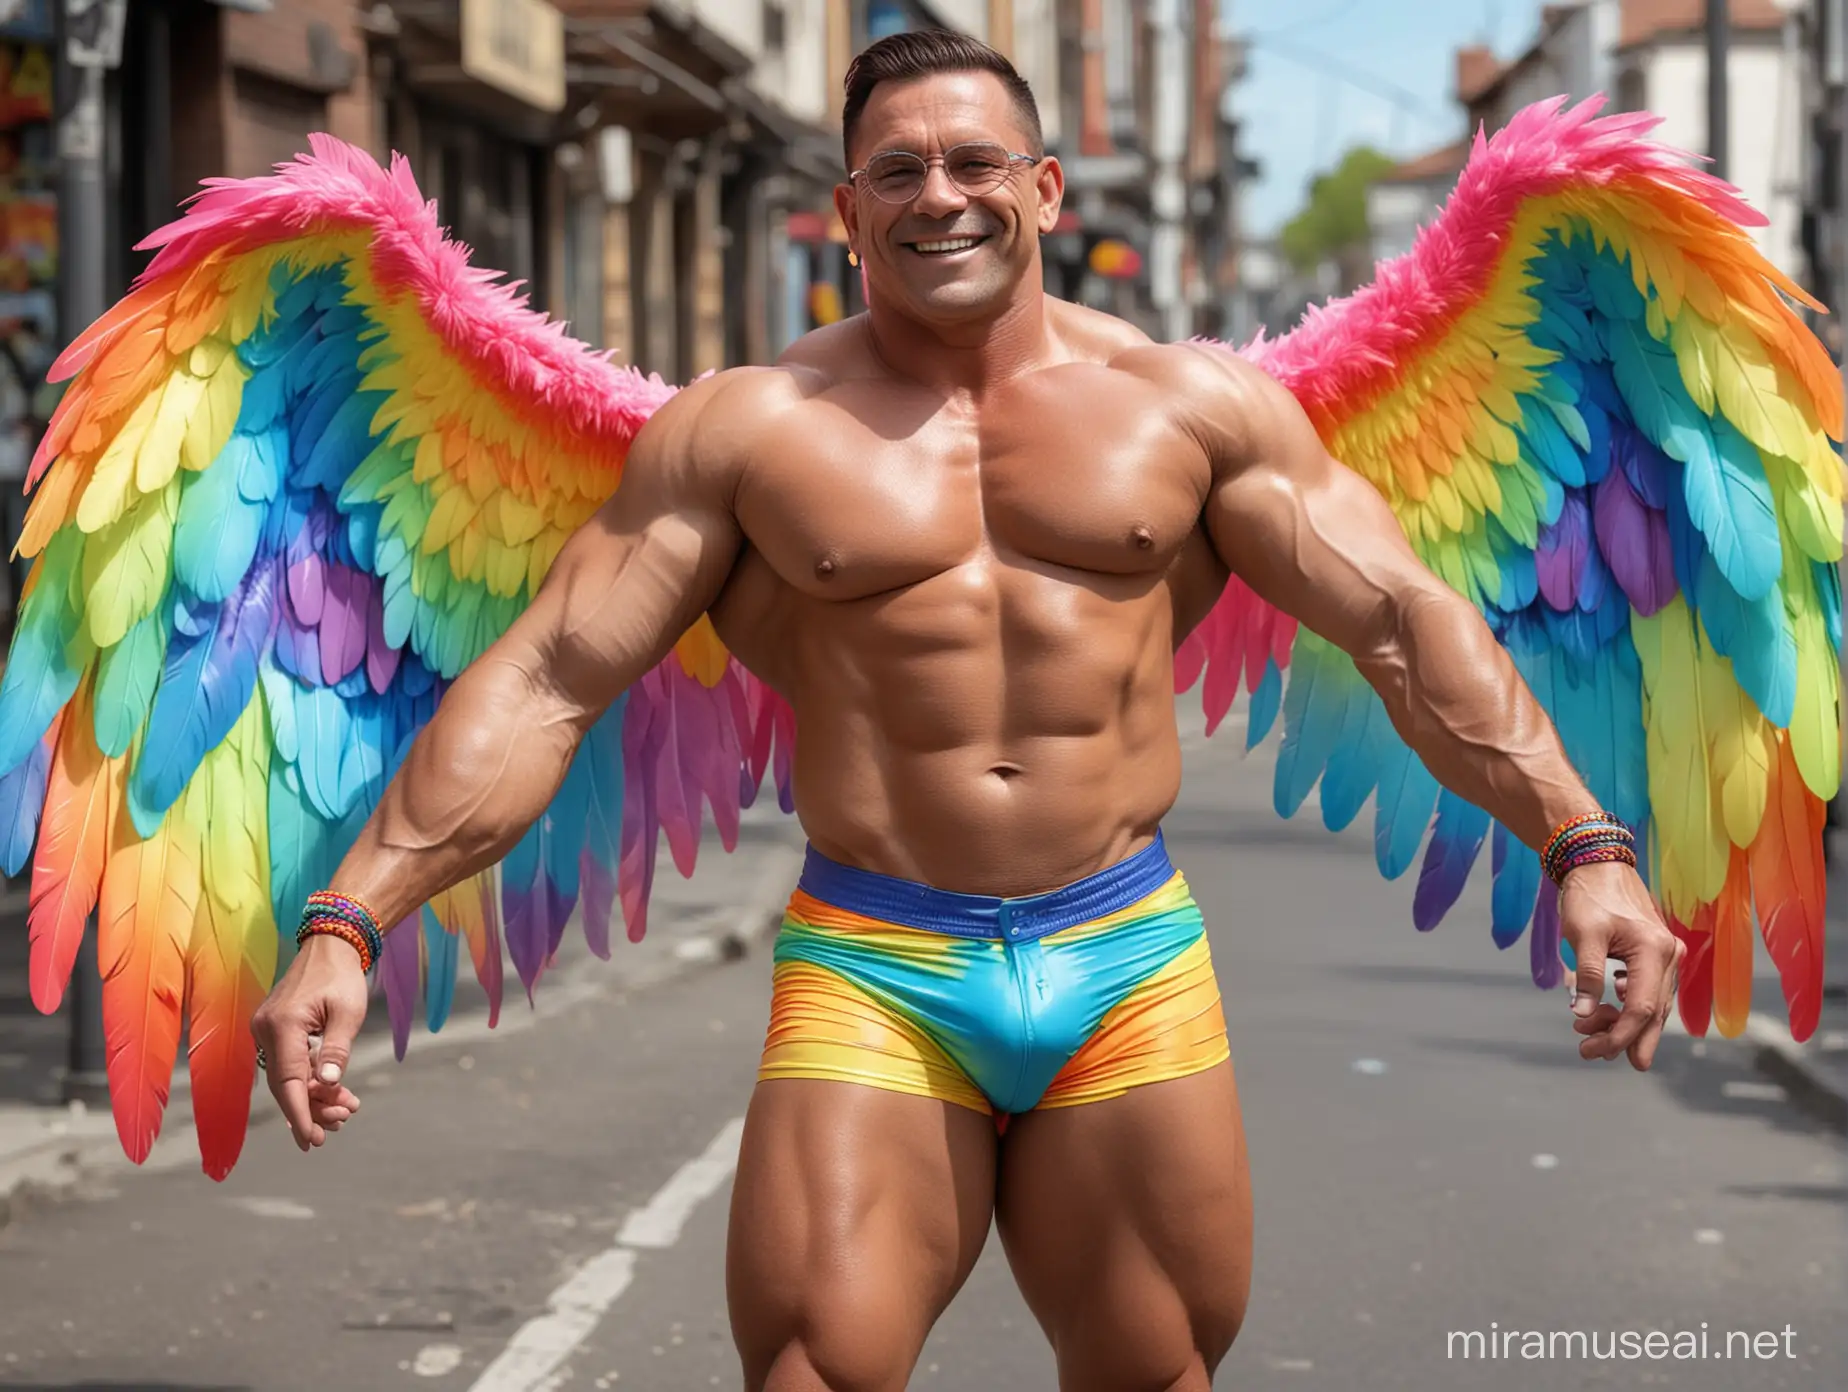 Muscular 40s Bodybuilder Flexing in Rainbow Colored Eagle Wings Jacket